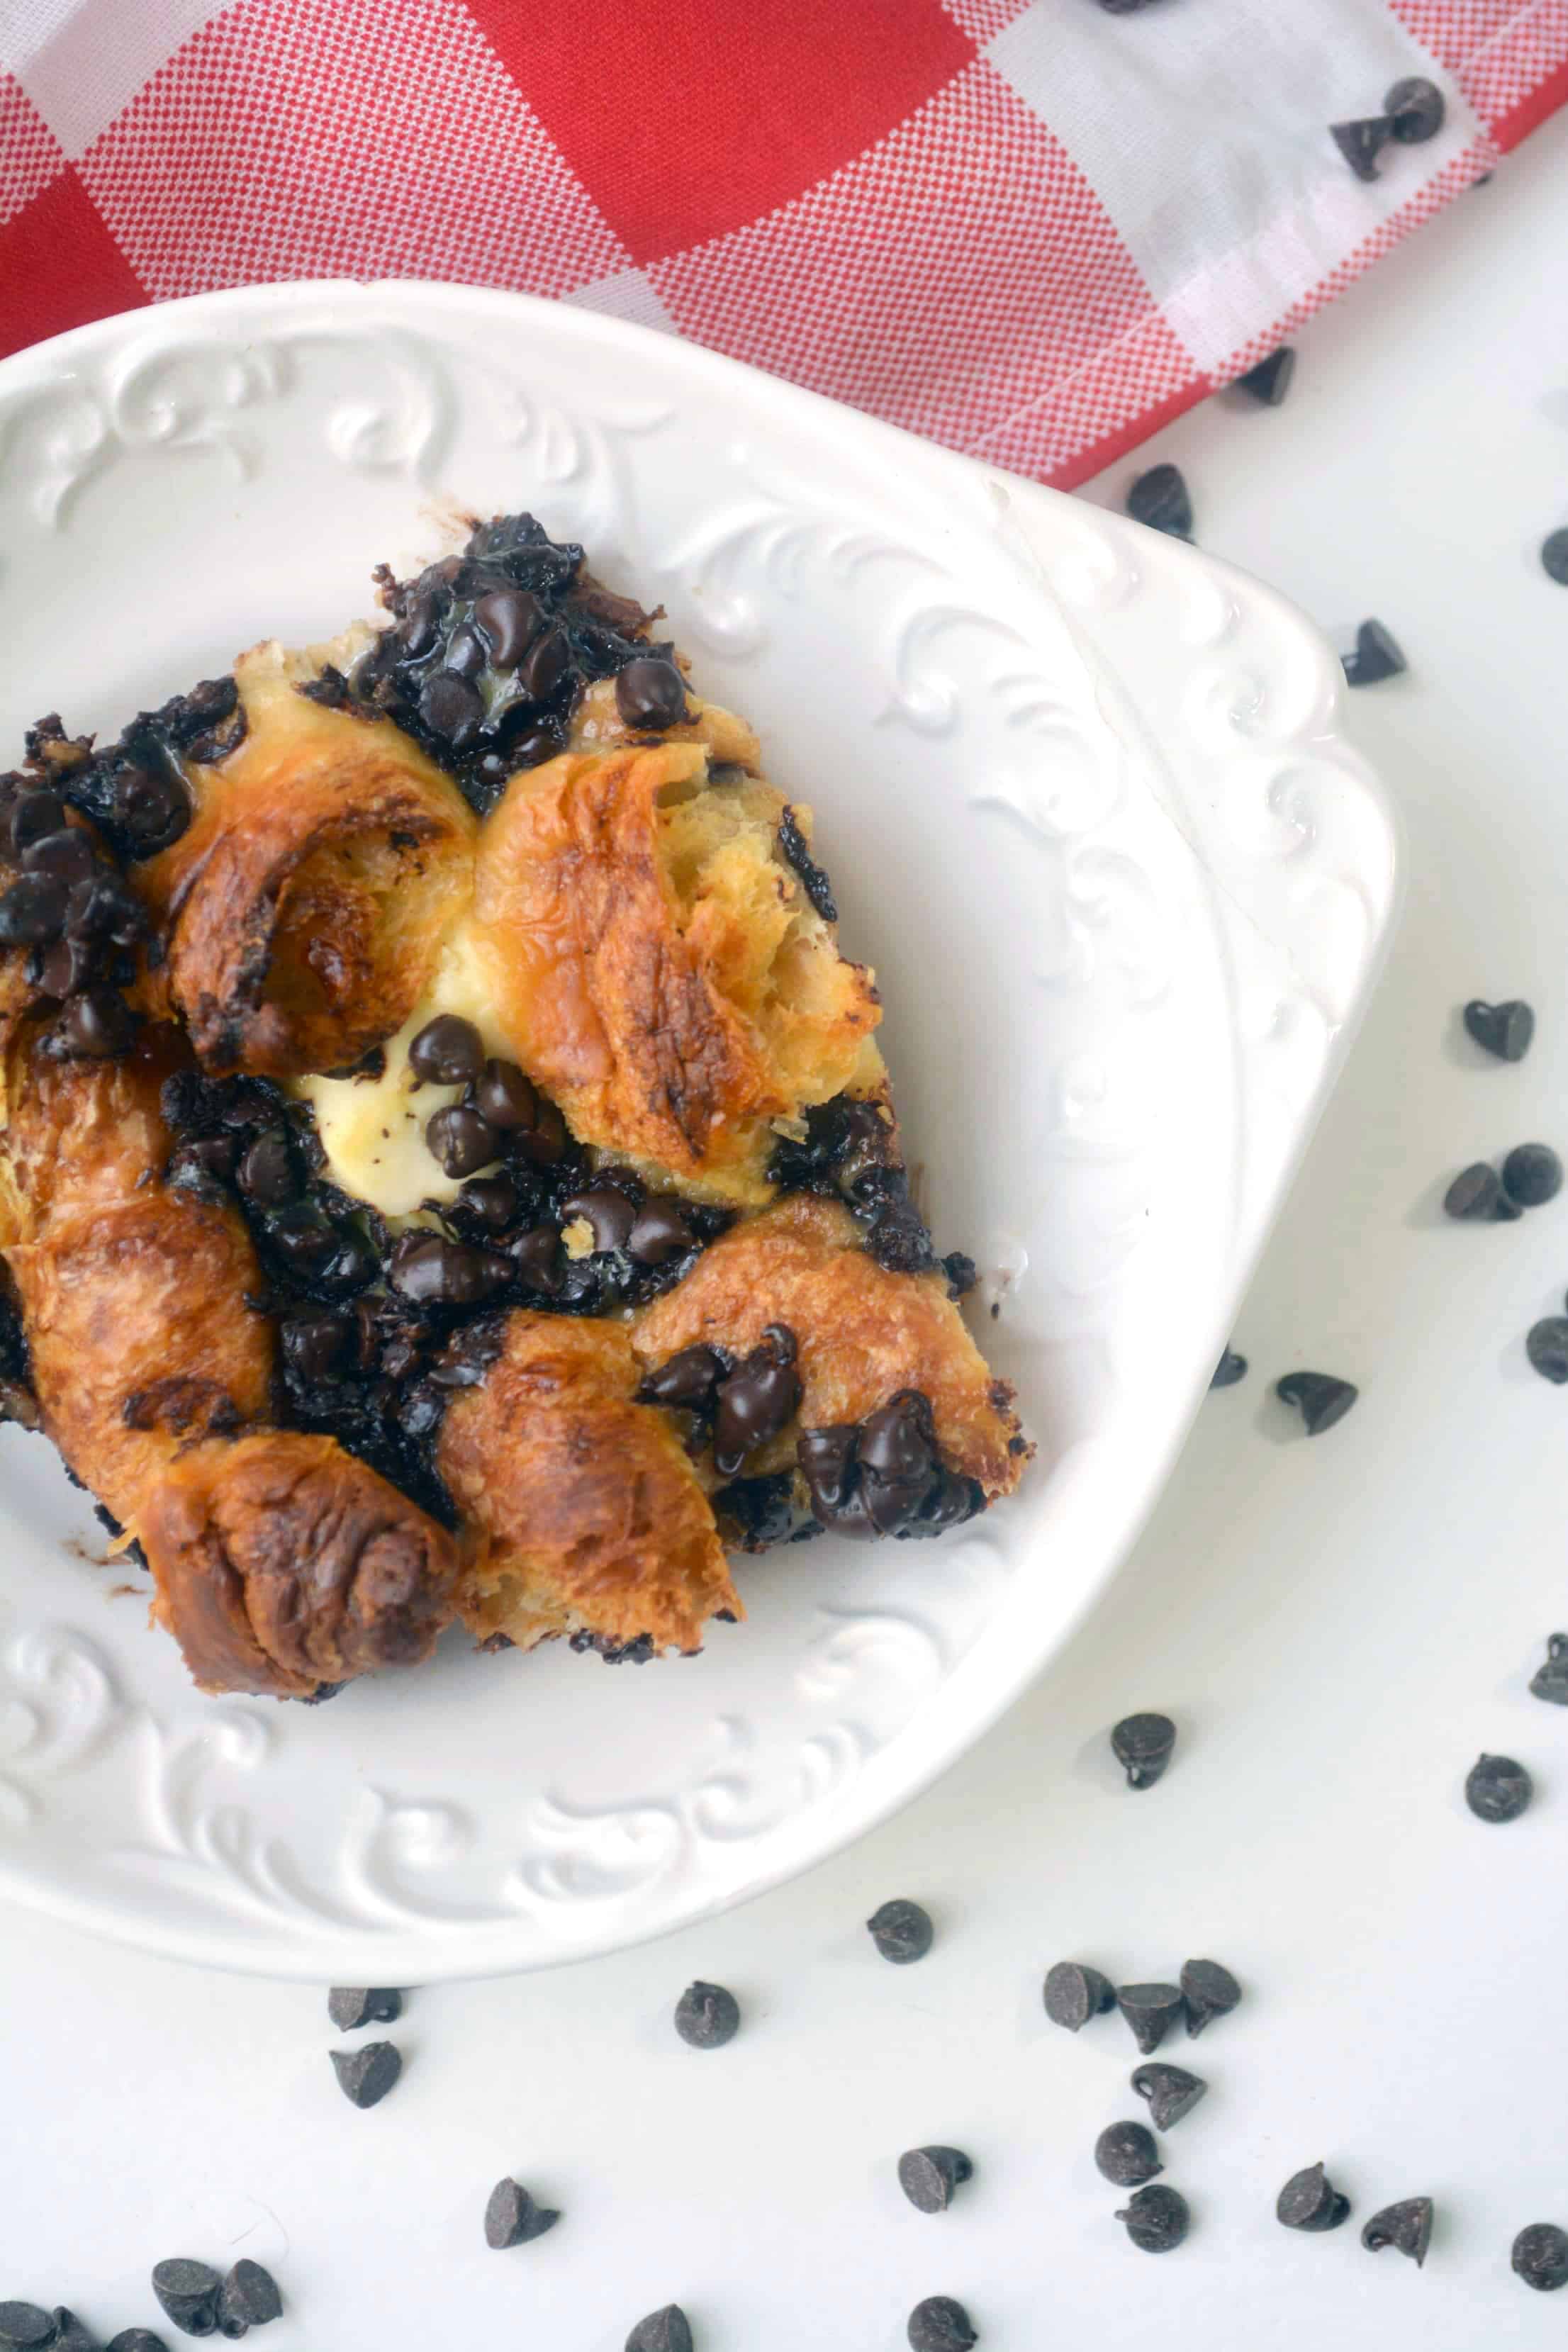 Sweet Breakfast Bake with Chocolate Croissants